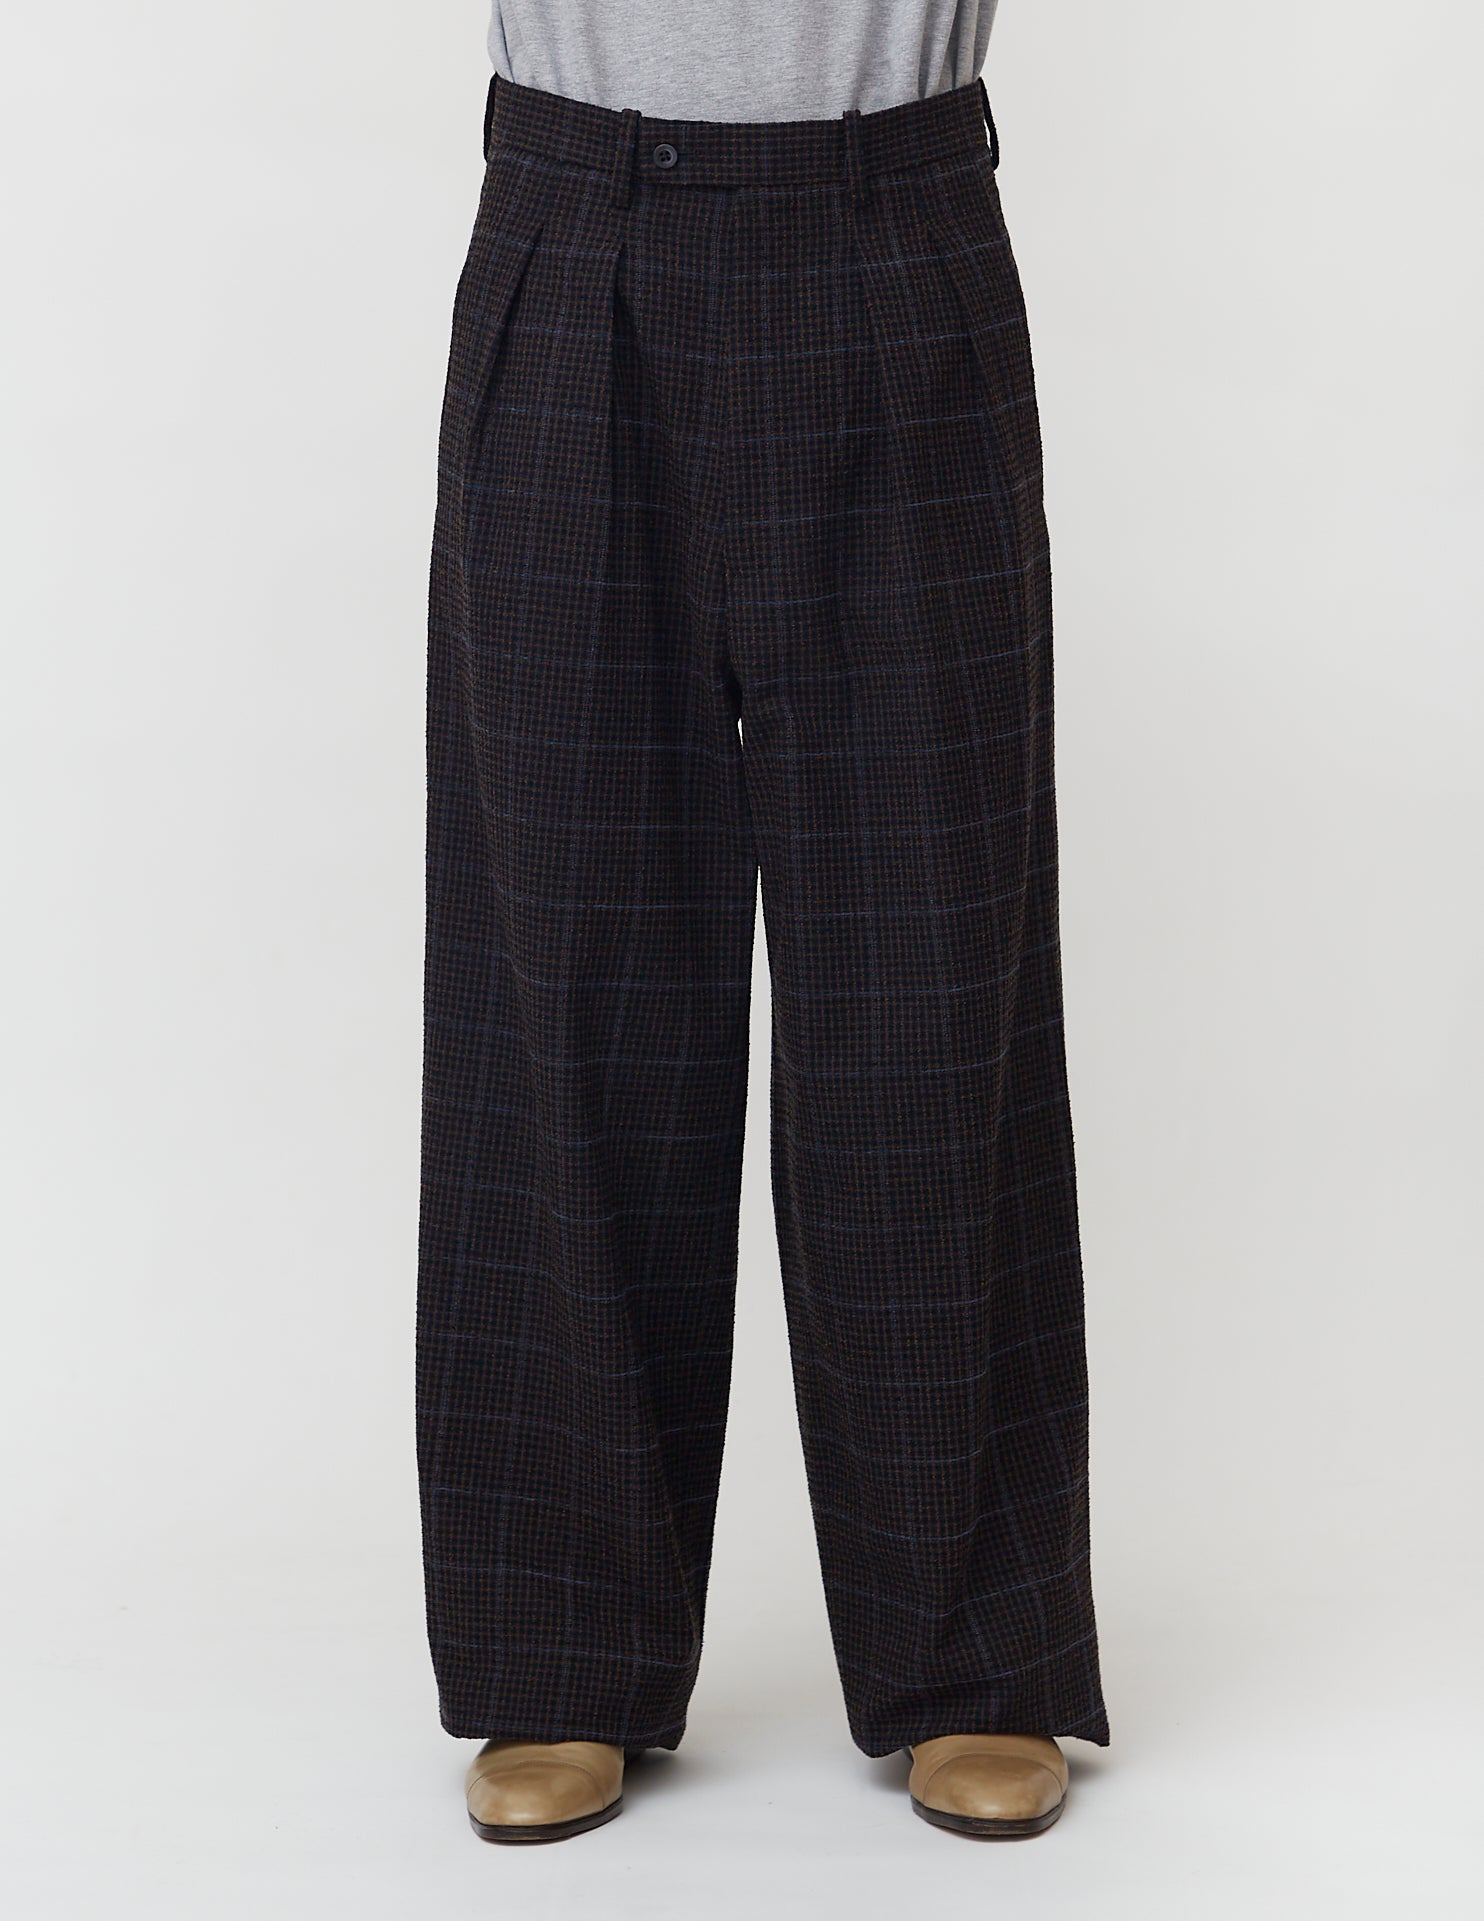 TUCKED WIDE PANTS navy x brown plaid – – m's braque